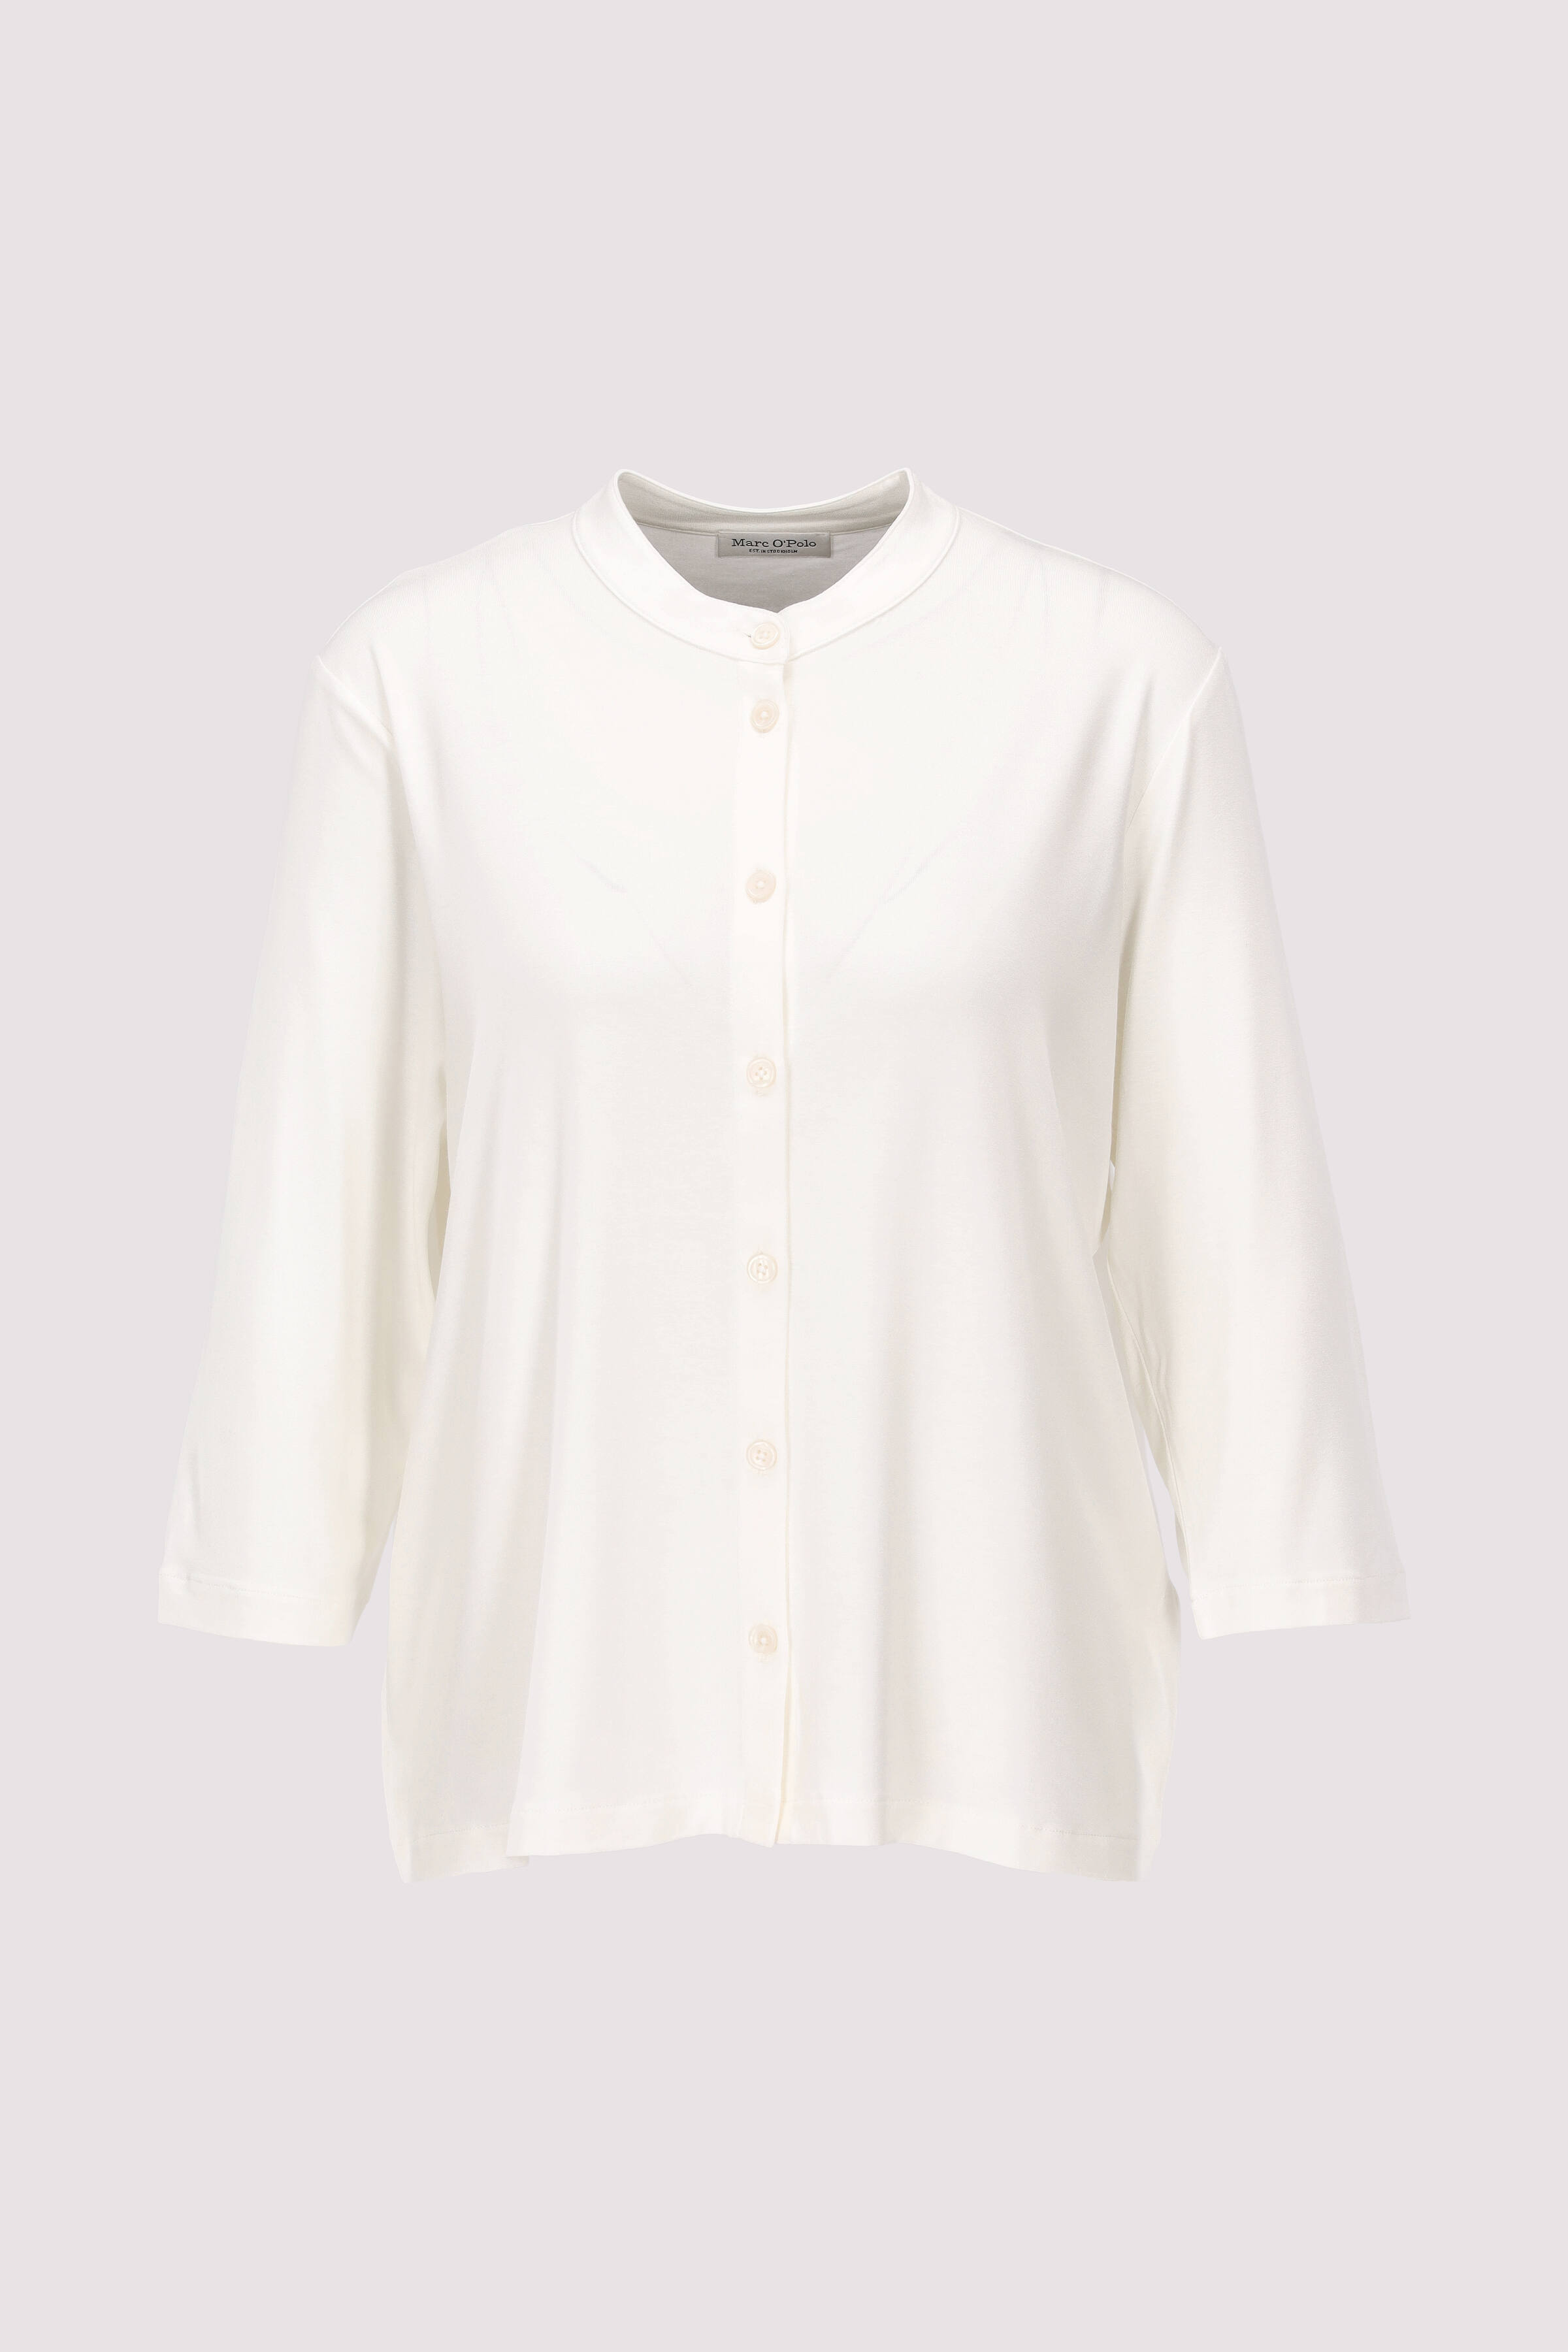 Jersey blouse, stand up collar